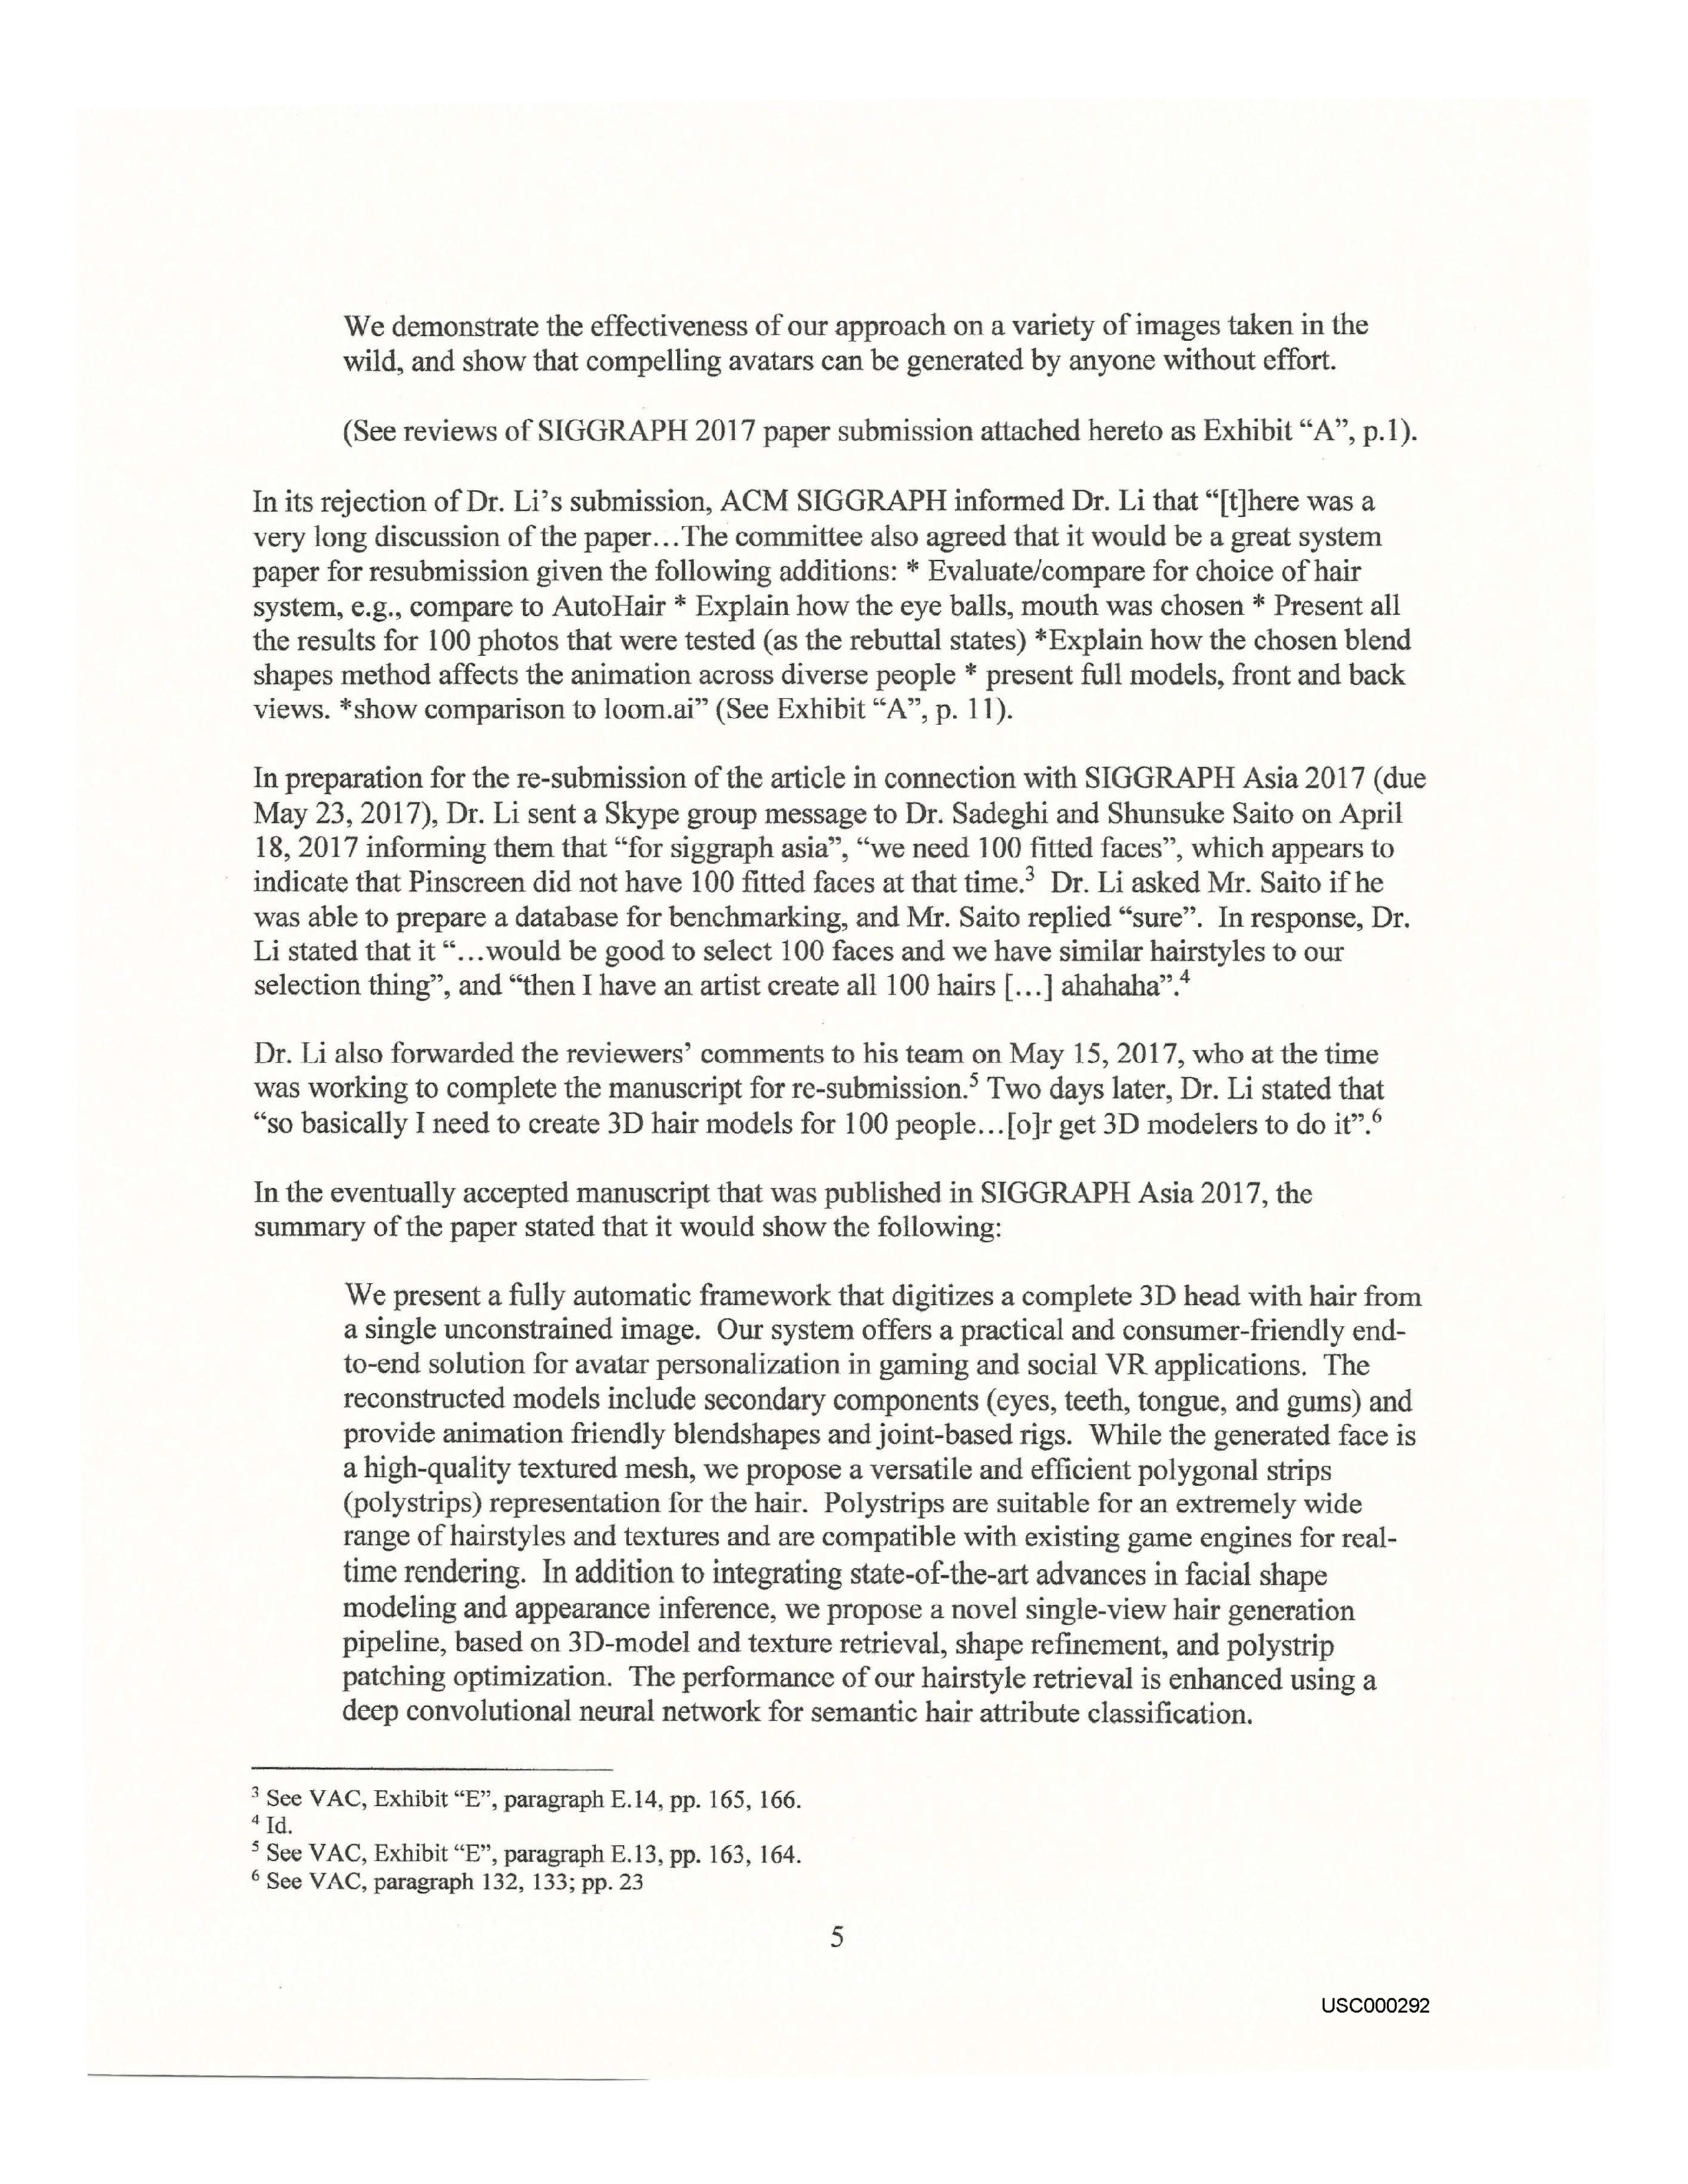 USC's Investigation Report re Hao Li's and Pinscreen's Scientific Misconduct at ACM SIGGRAPH RTL 2017 [Summary] Page 22